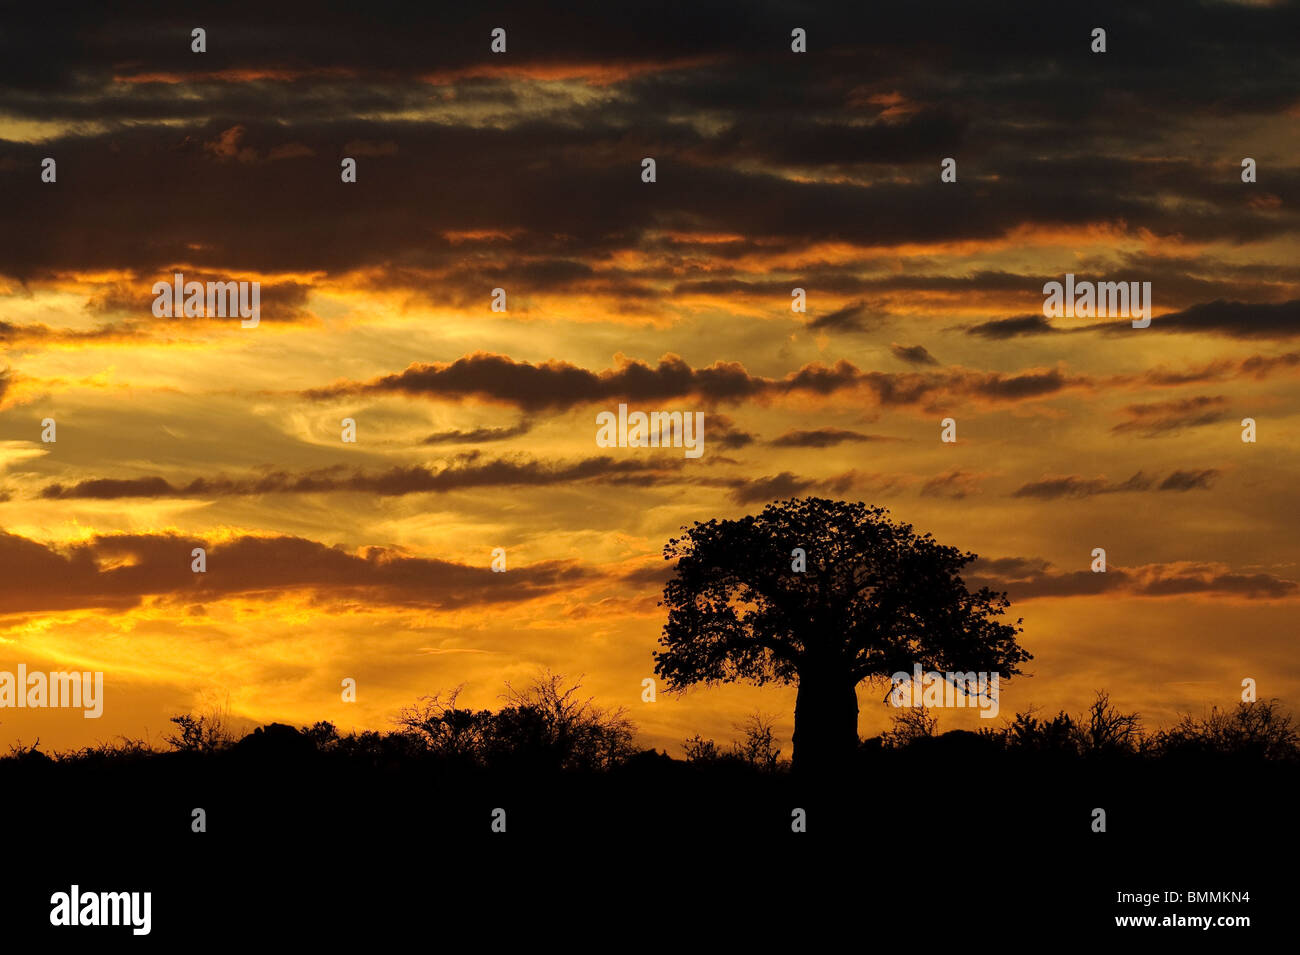 Silhouette of African Baobab (Adansonia digitata) tree at sunset, Mapungubwe Game Reserve, Limpopo Province, South Africa Stock Photo